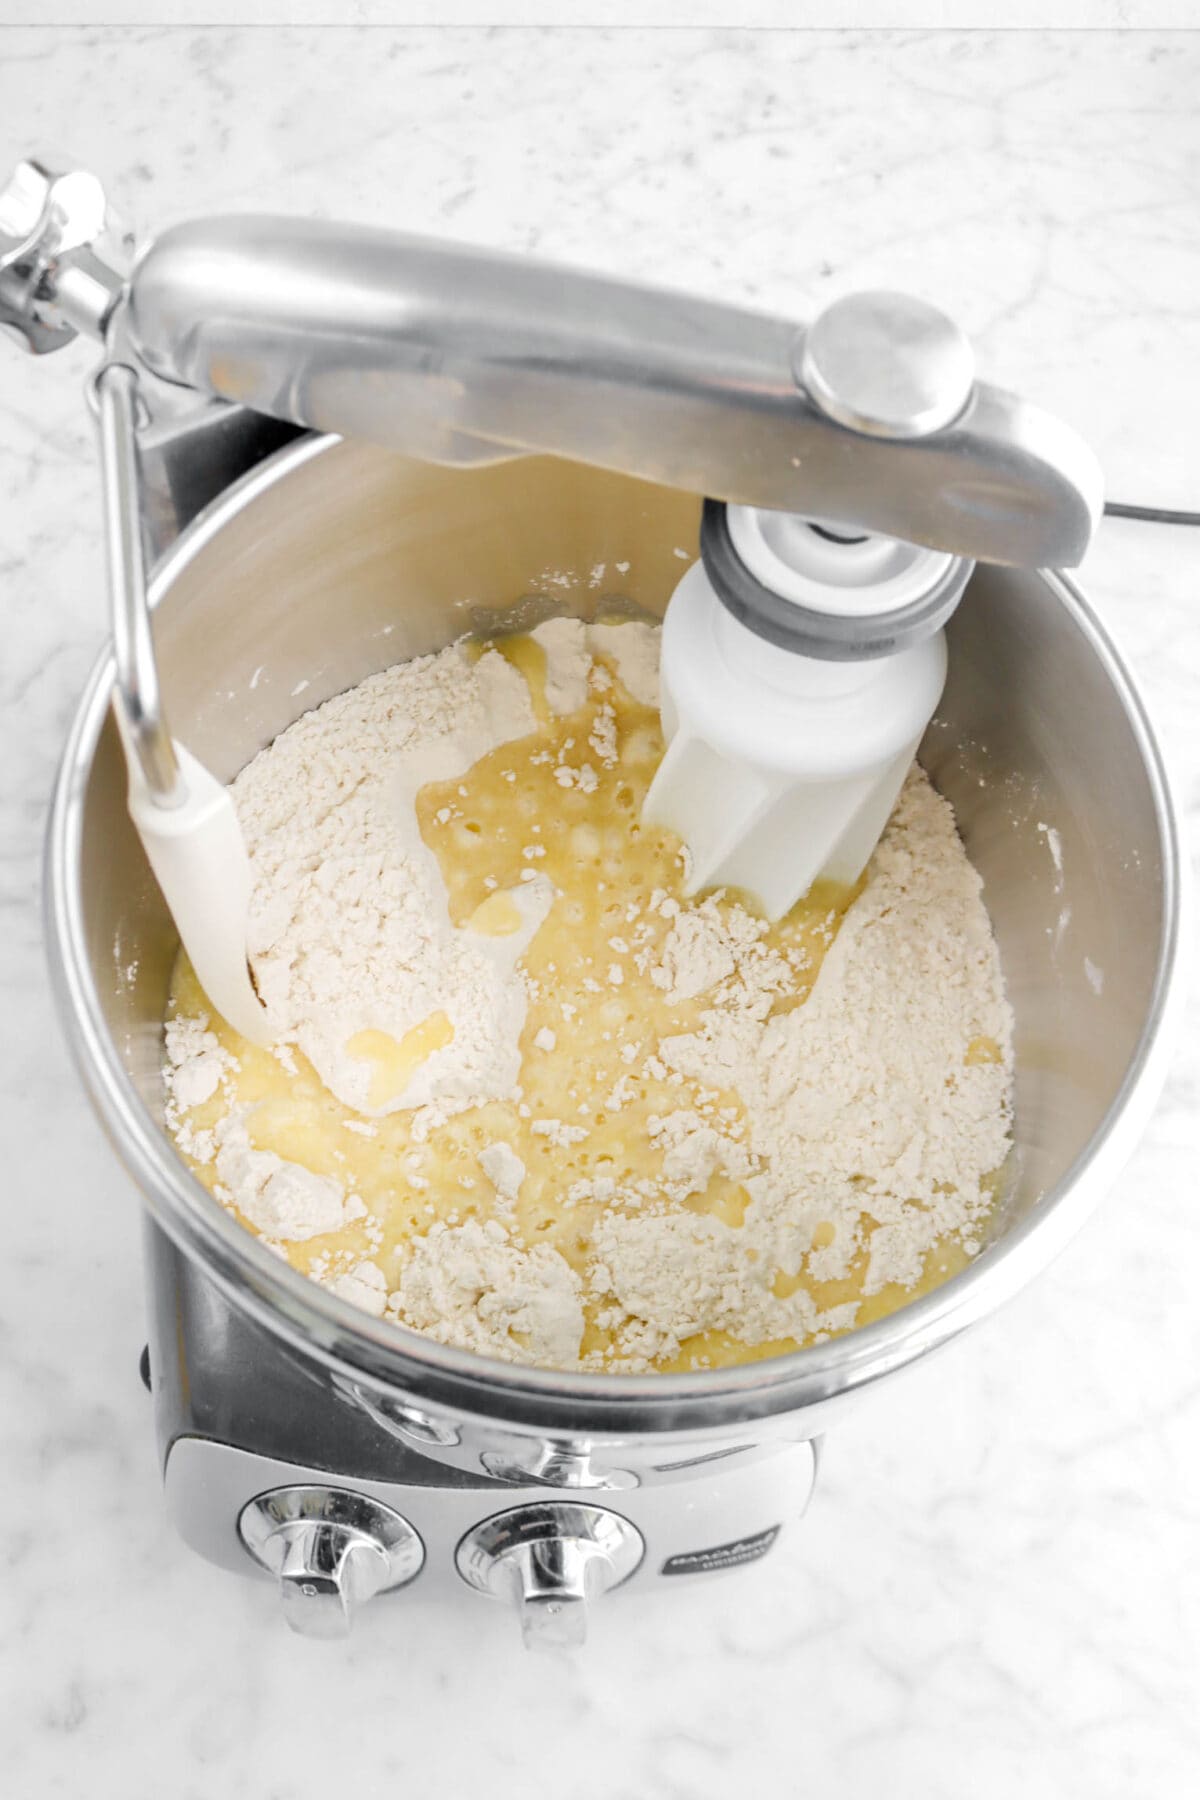 butter and milk mixture added to dry ingredients